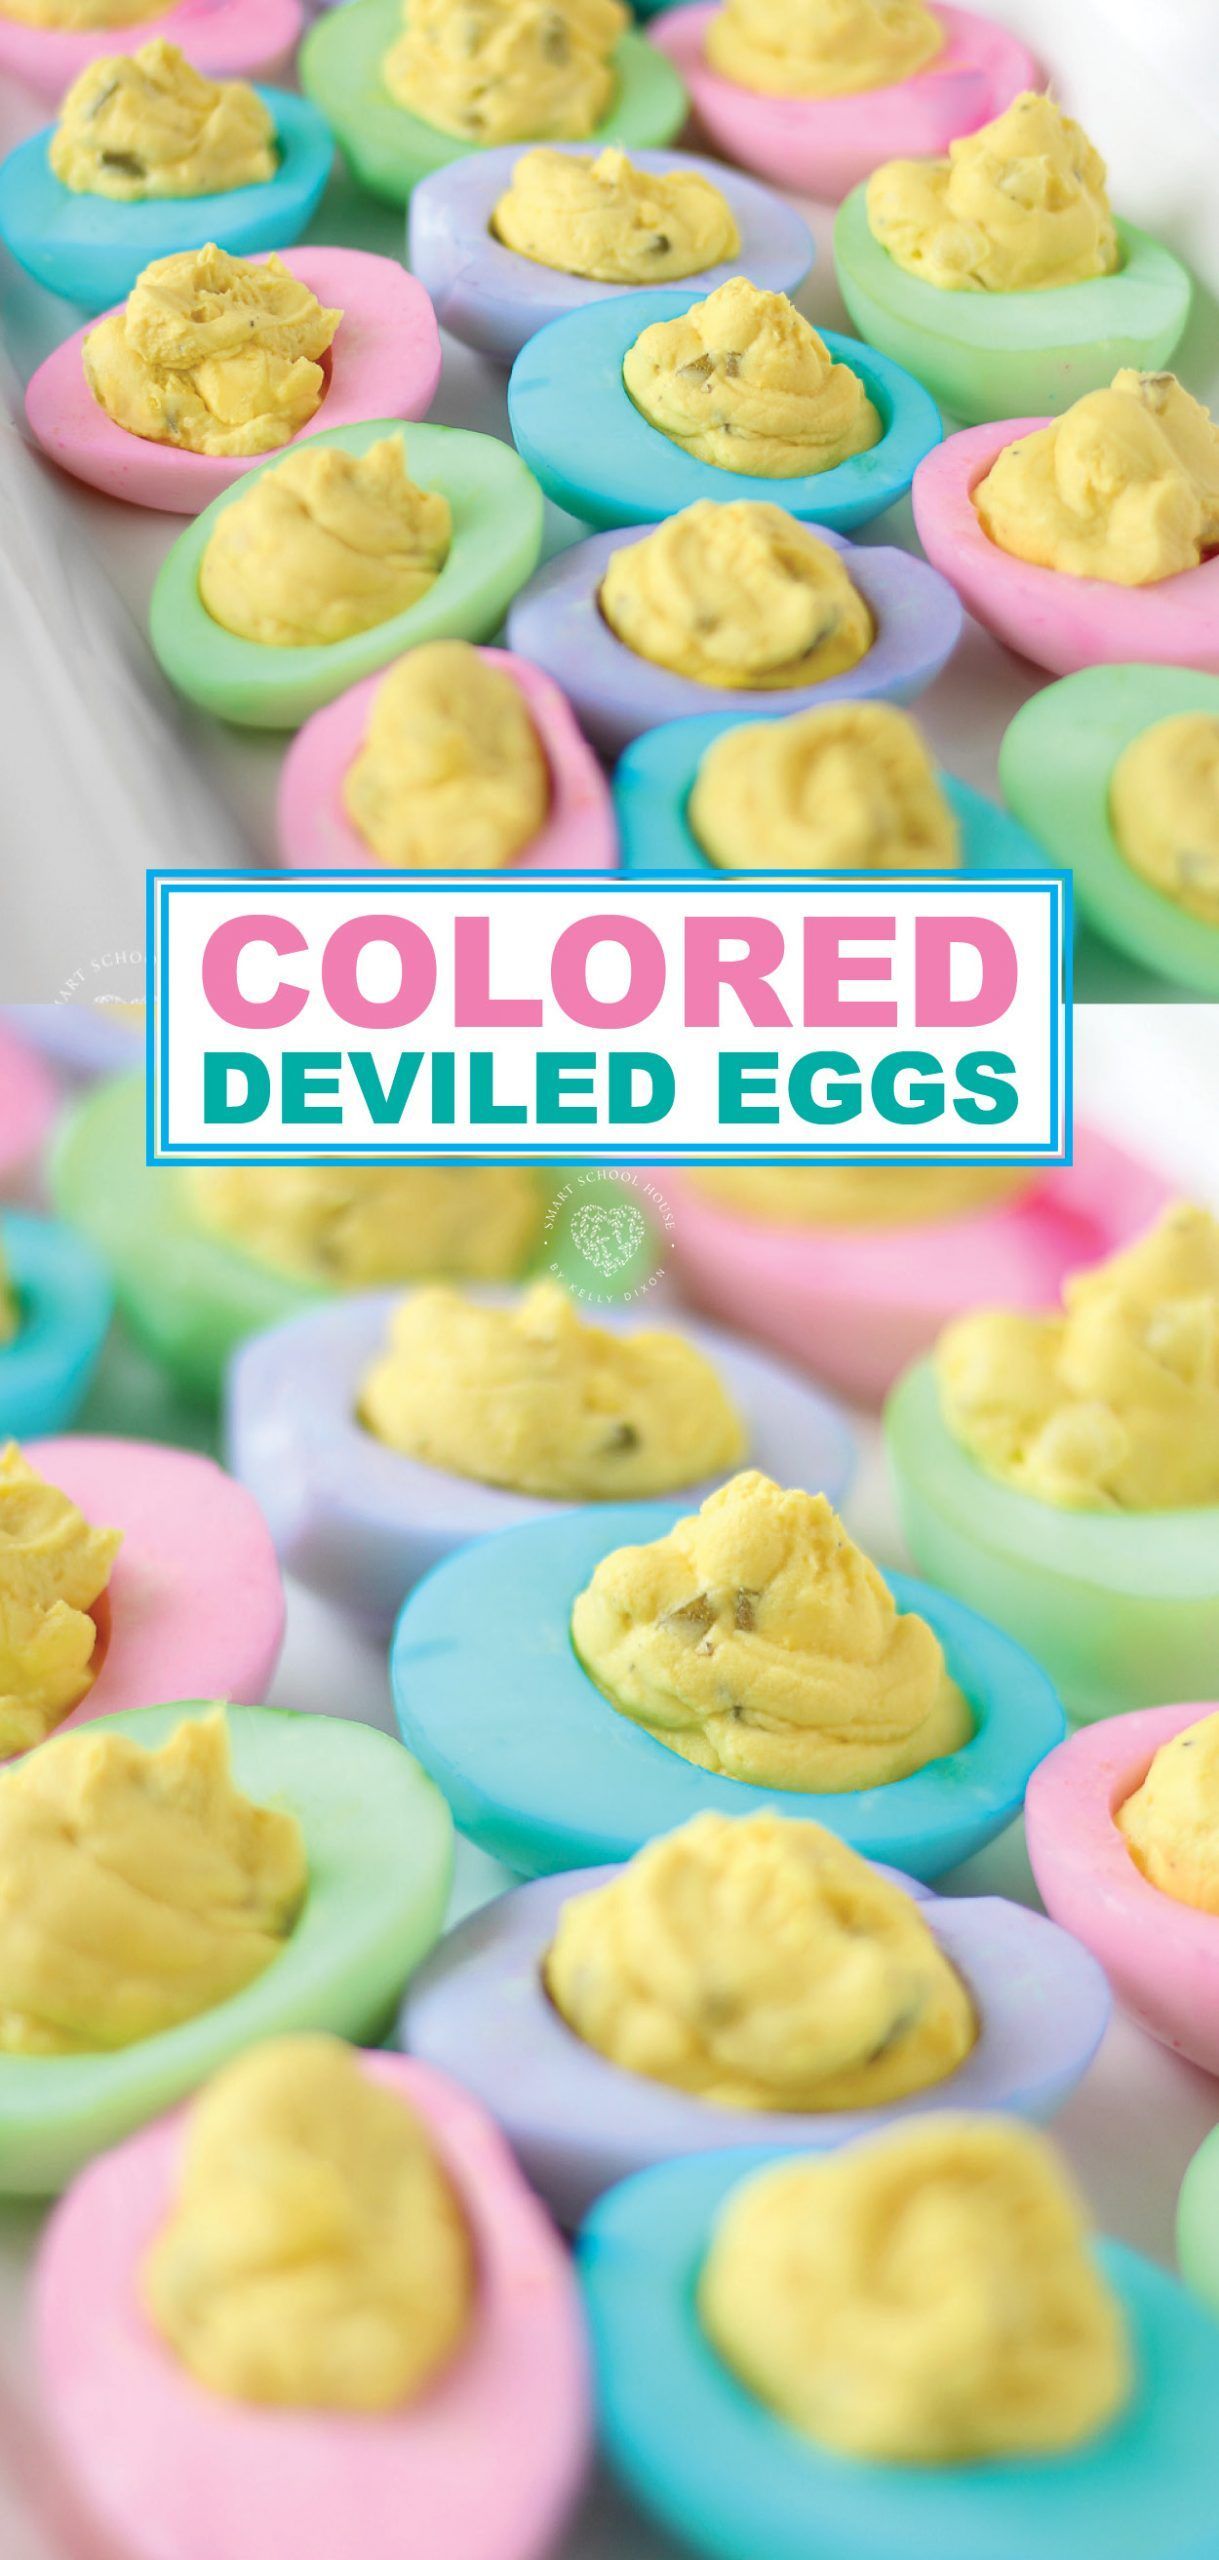 Colored Deviled Eggs for Easter - Colored Deviled Eggs for Easter -   13 diy Food cute ideas